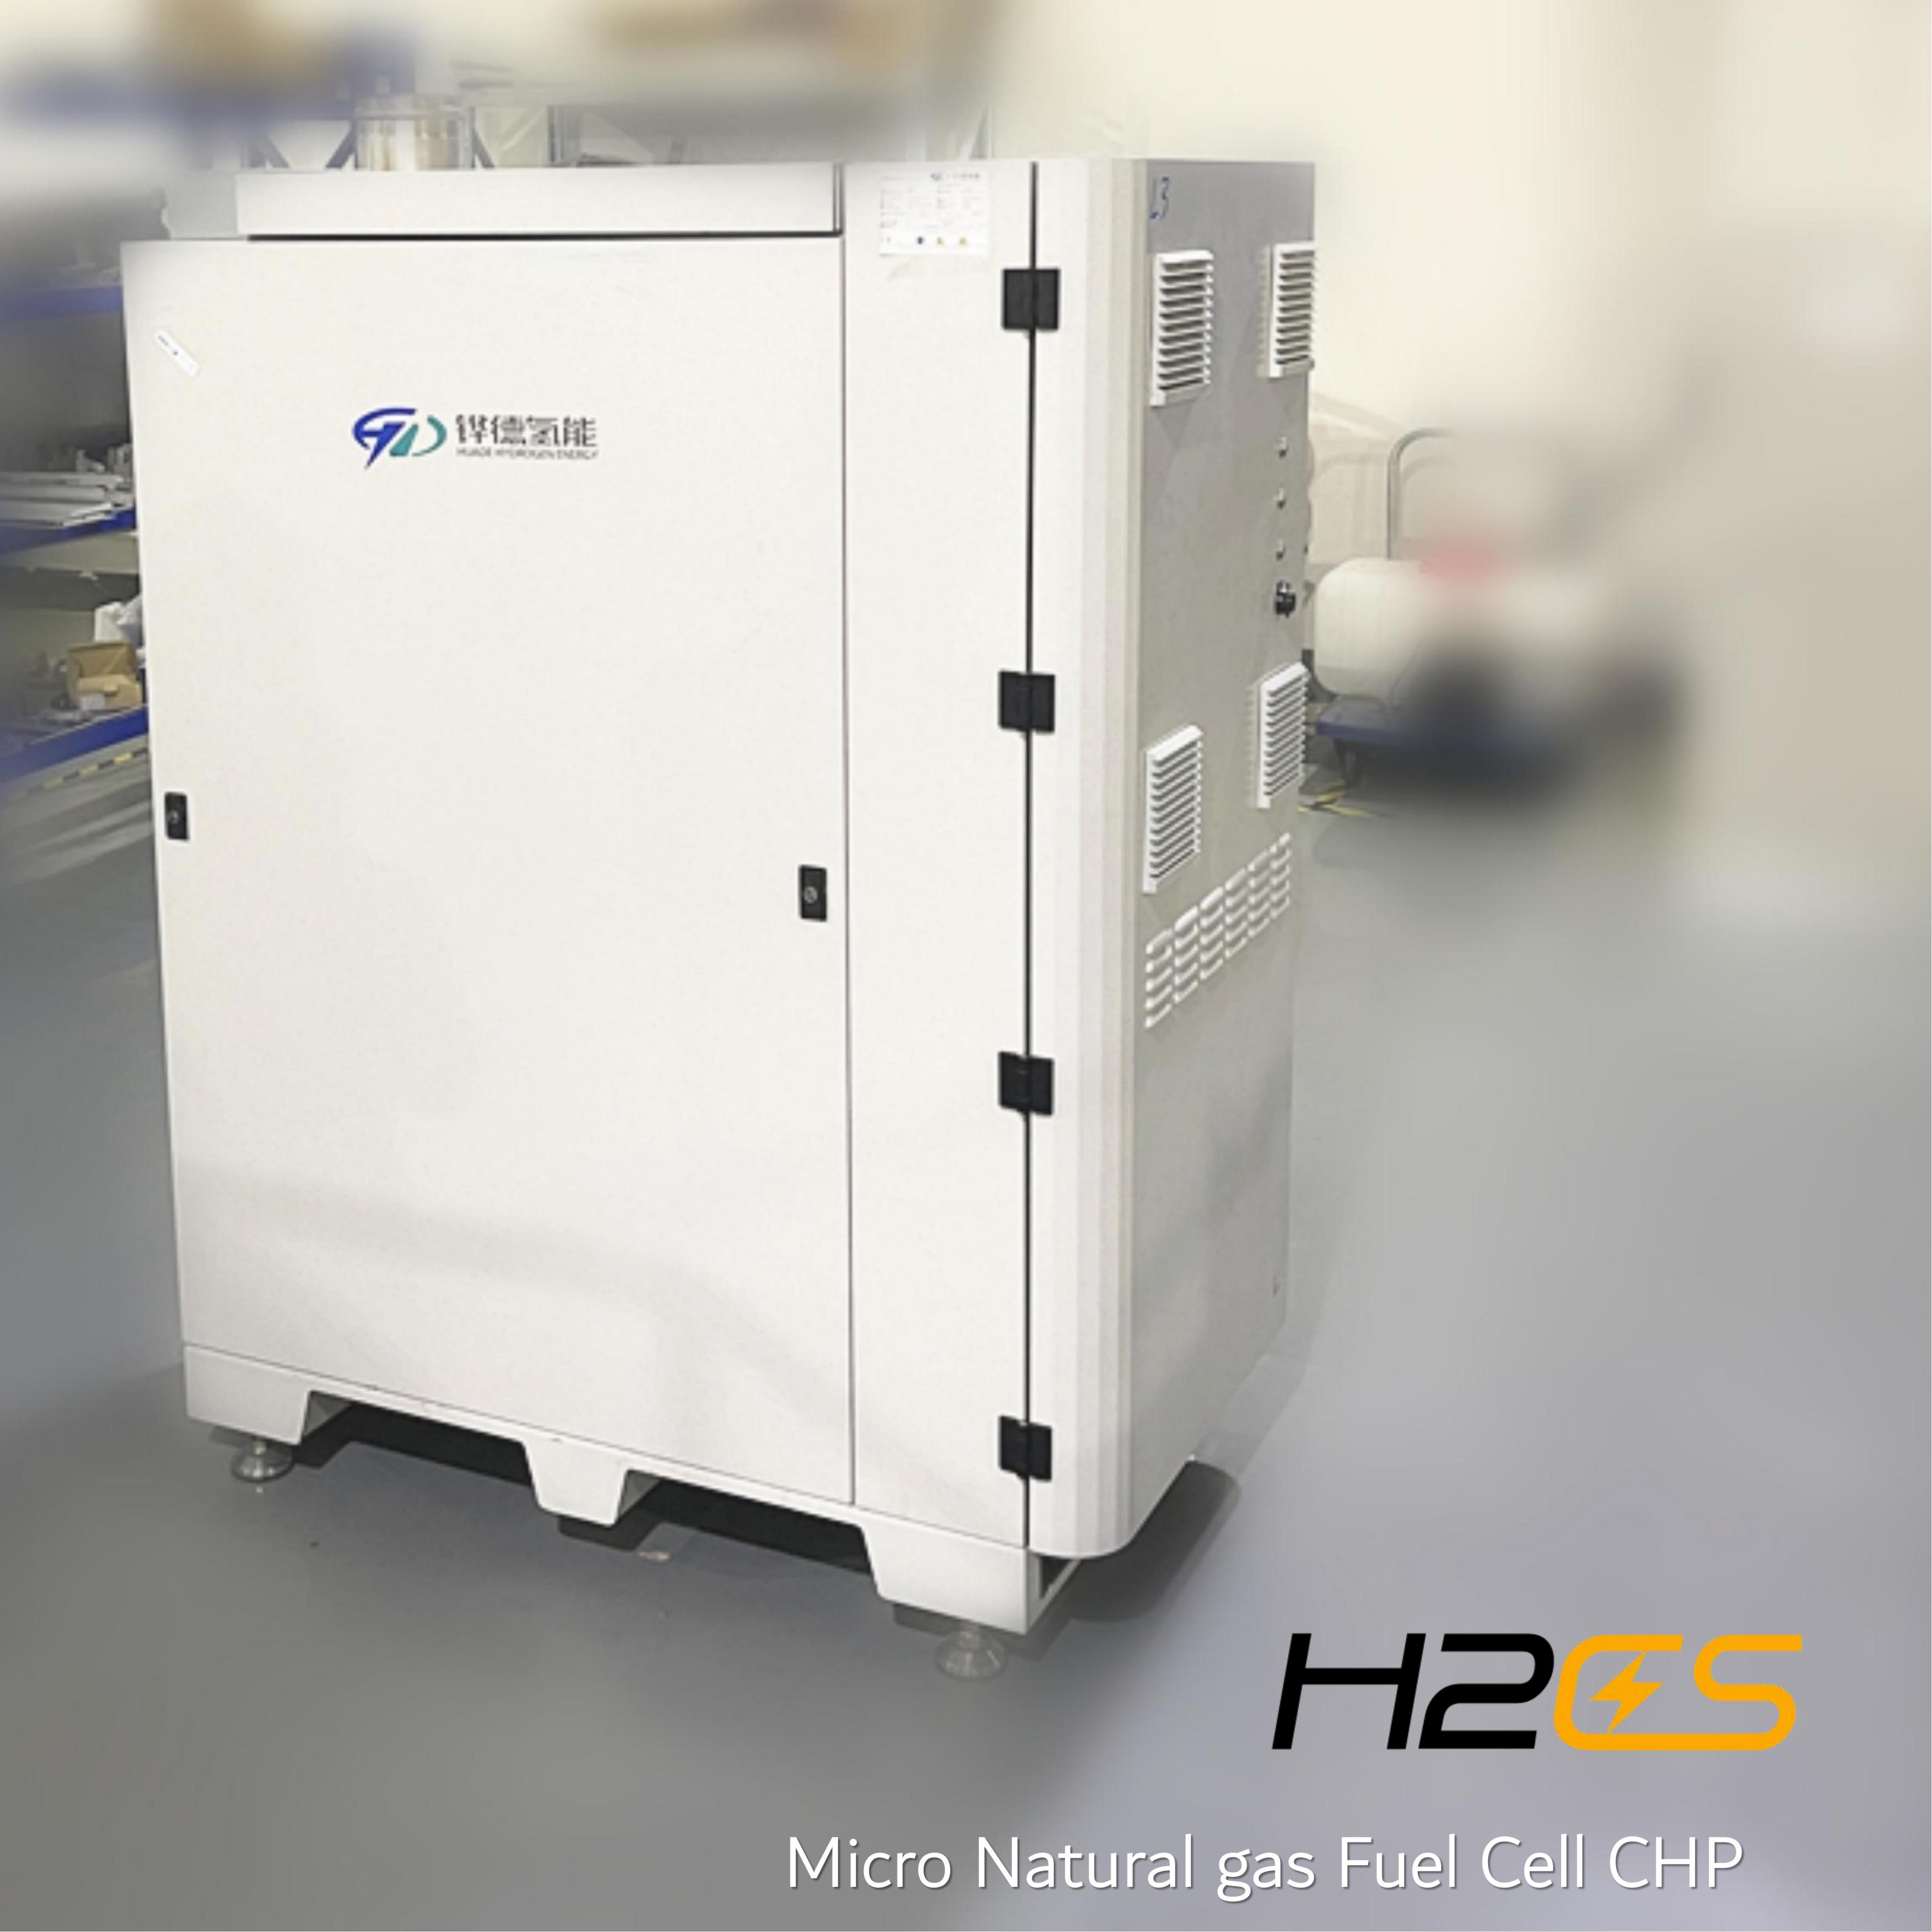 Mini Fuel Cell Domestic CHP System